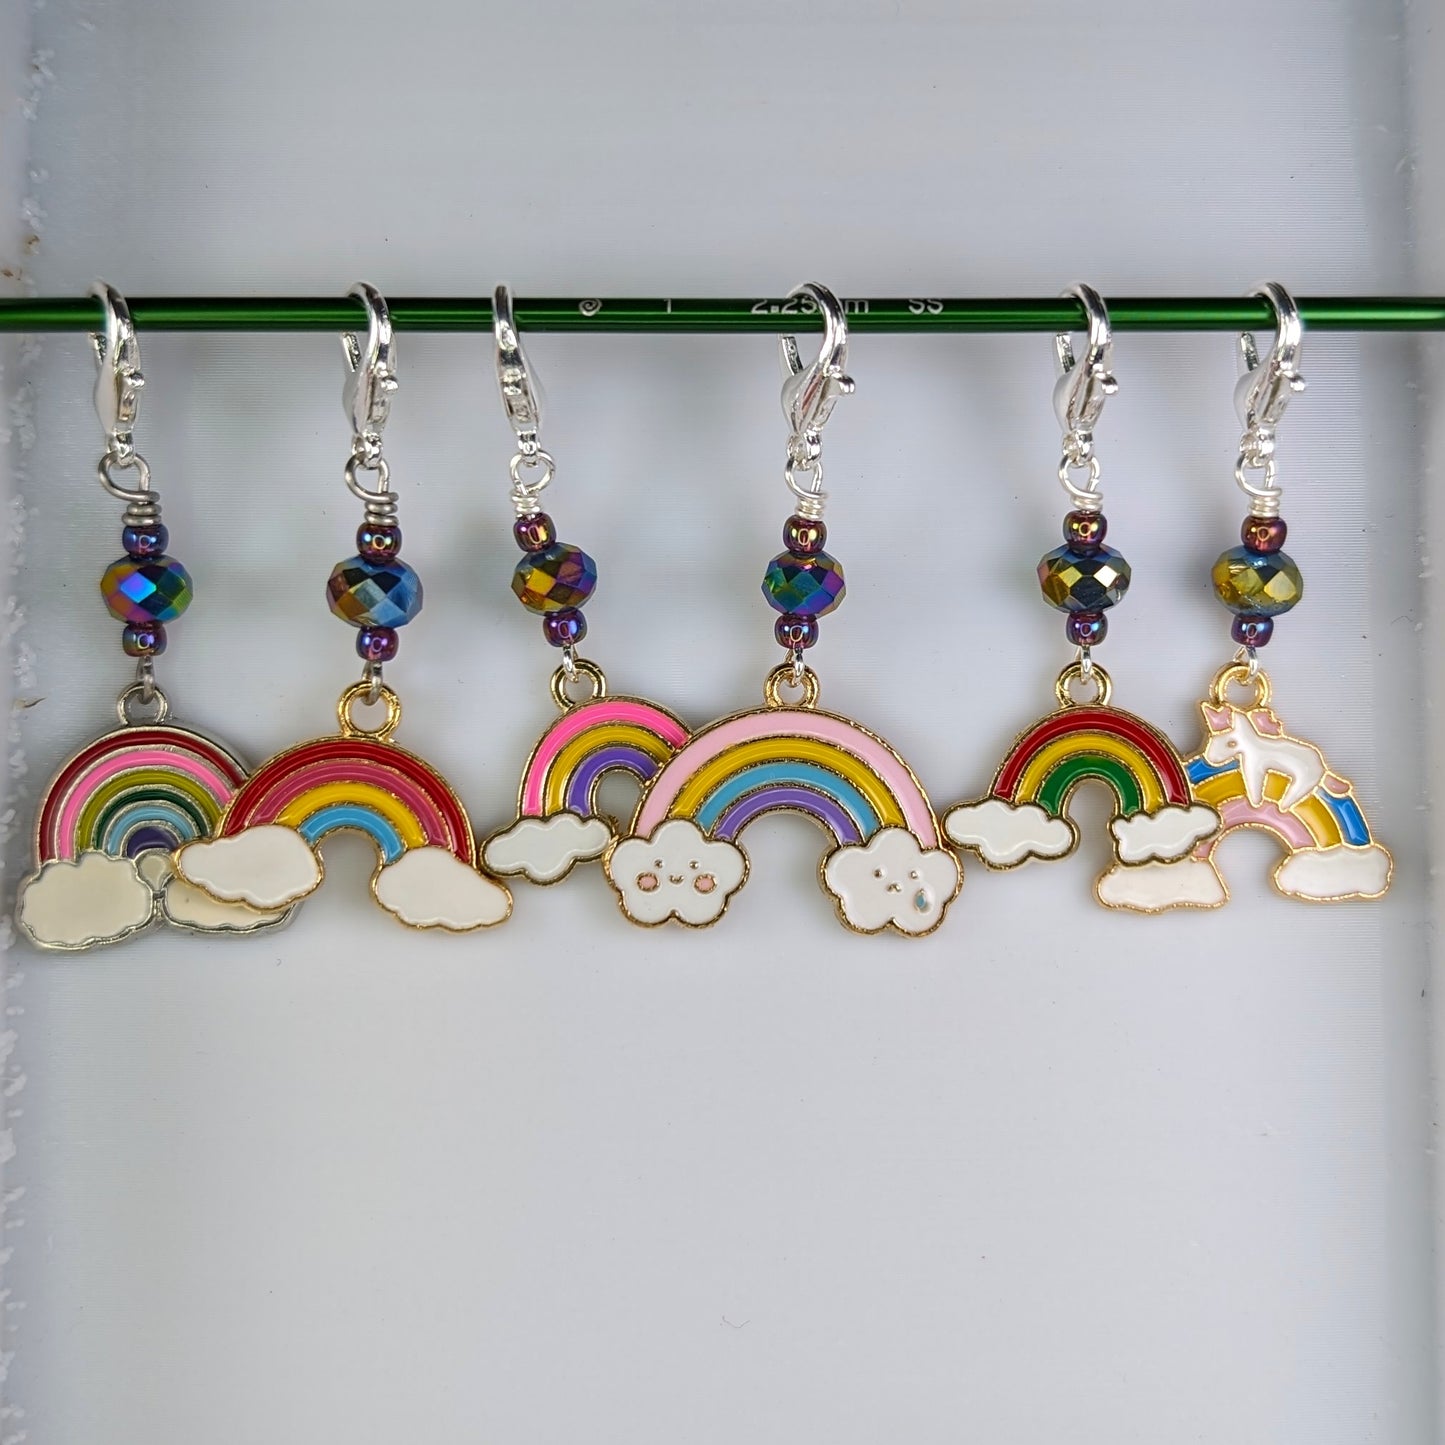 Somewhere Over the Rainbow Earrings & Stitch Markers